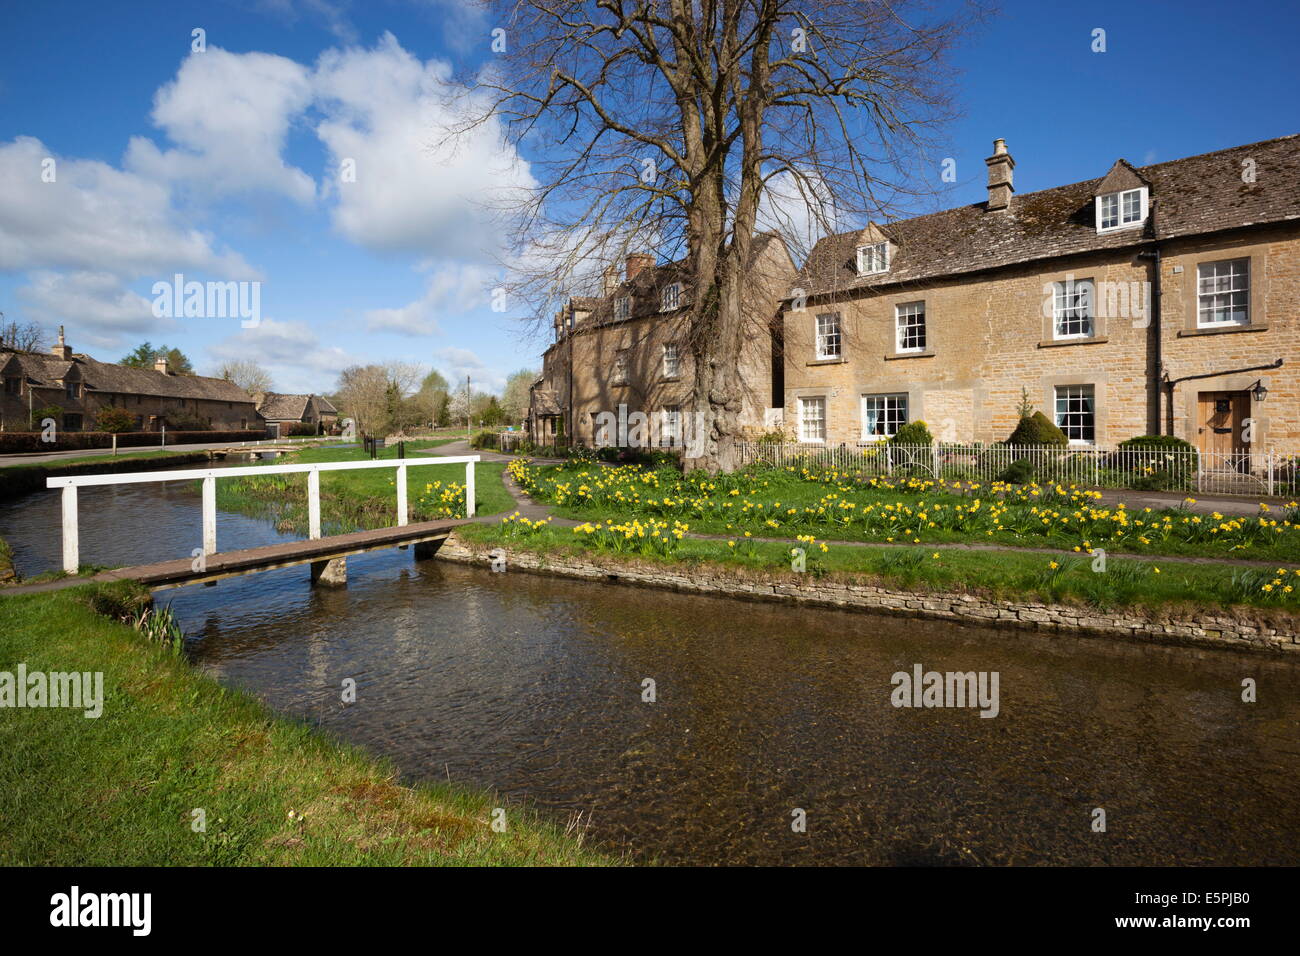 Cotswold cottages dal fiume occhio, Lower Slaughter, Cotswolds, Gloucestershire, England, Regno Unito, Europa Foto Stock